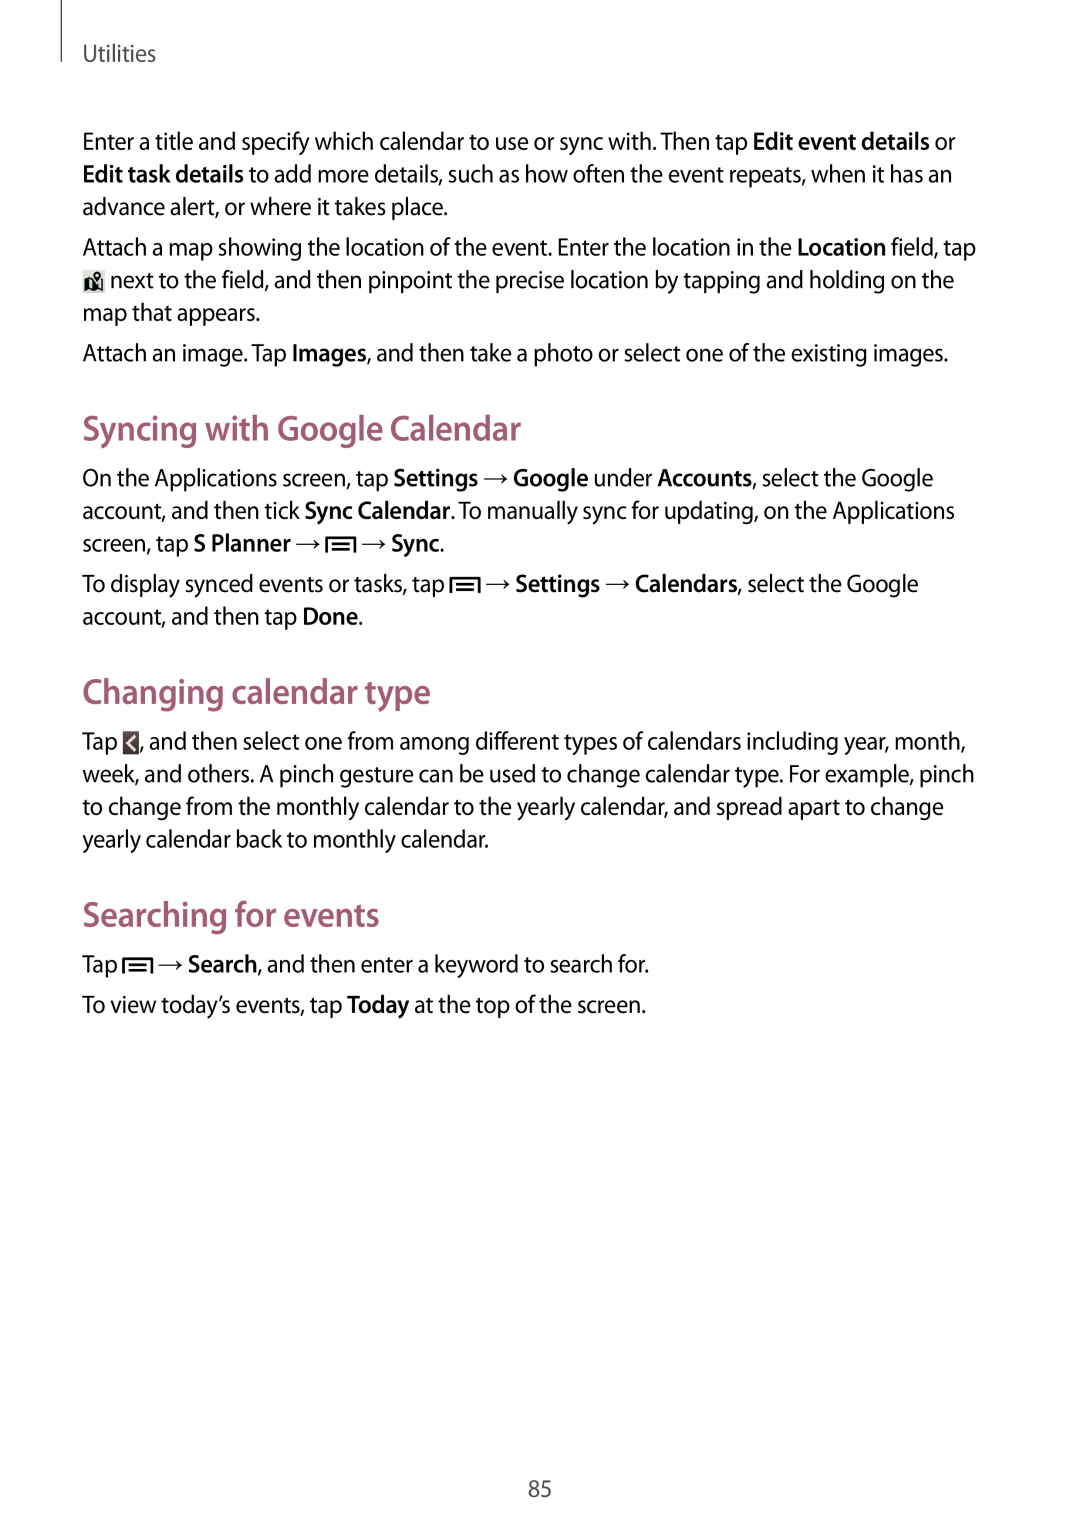 Samsung GT-I8190TANFTM manual Syncing with Google Calendar, Changing calendar type, Searching for events, Utilities 